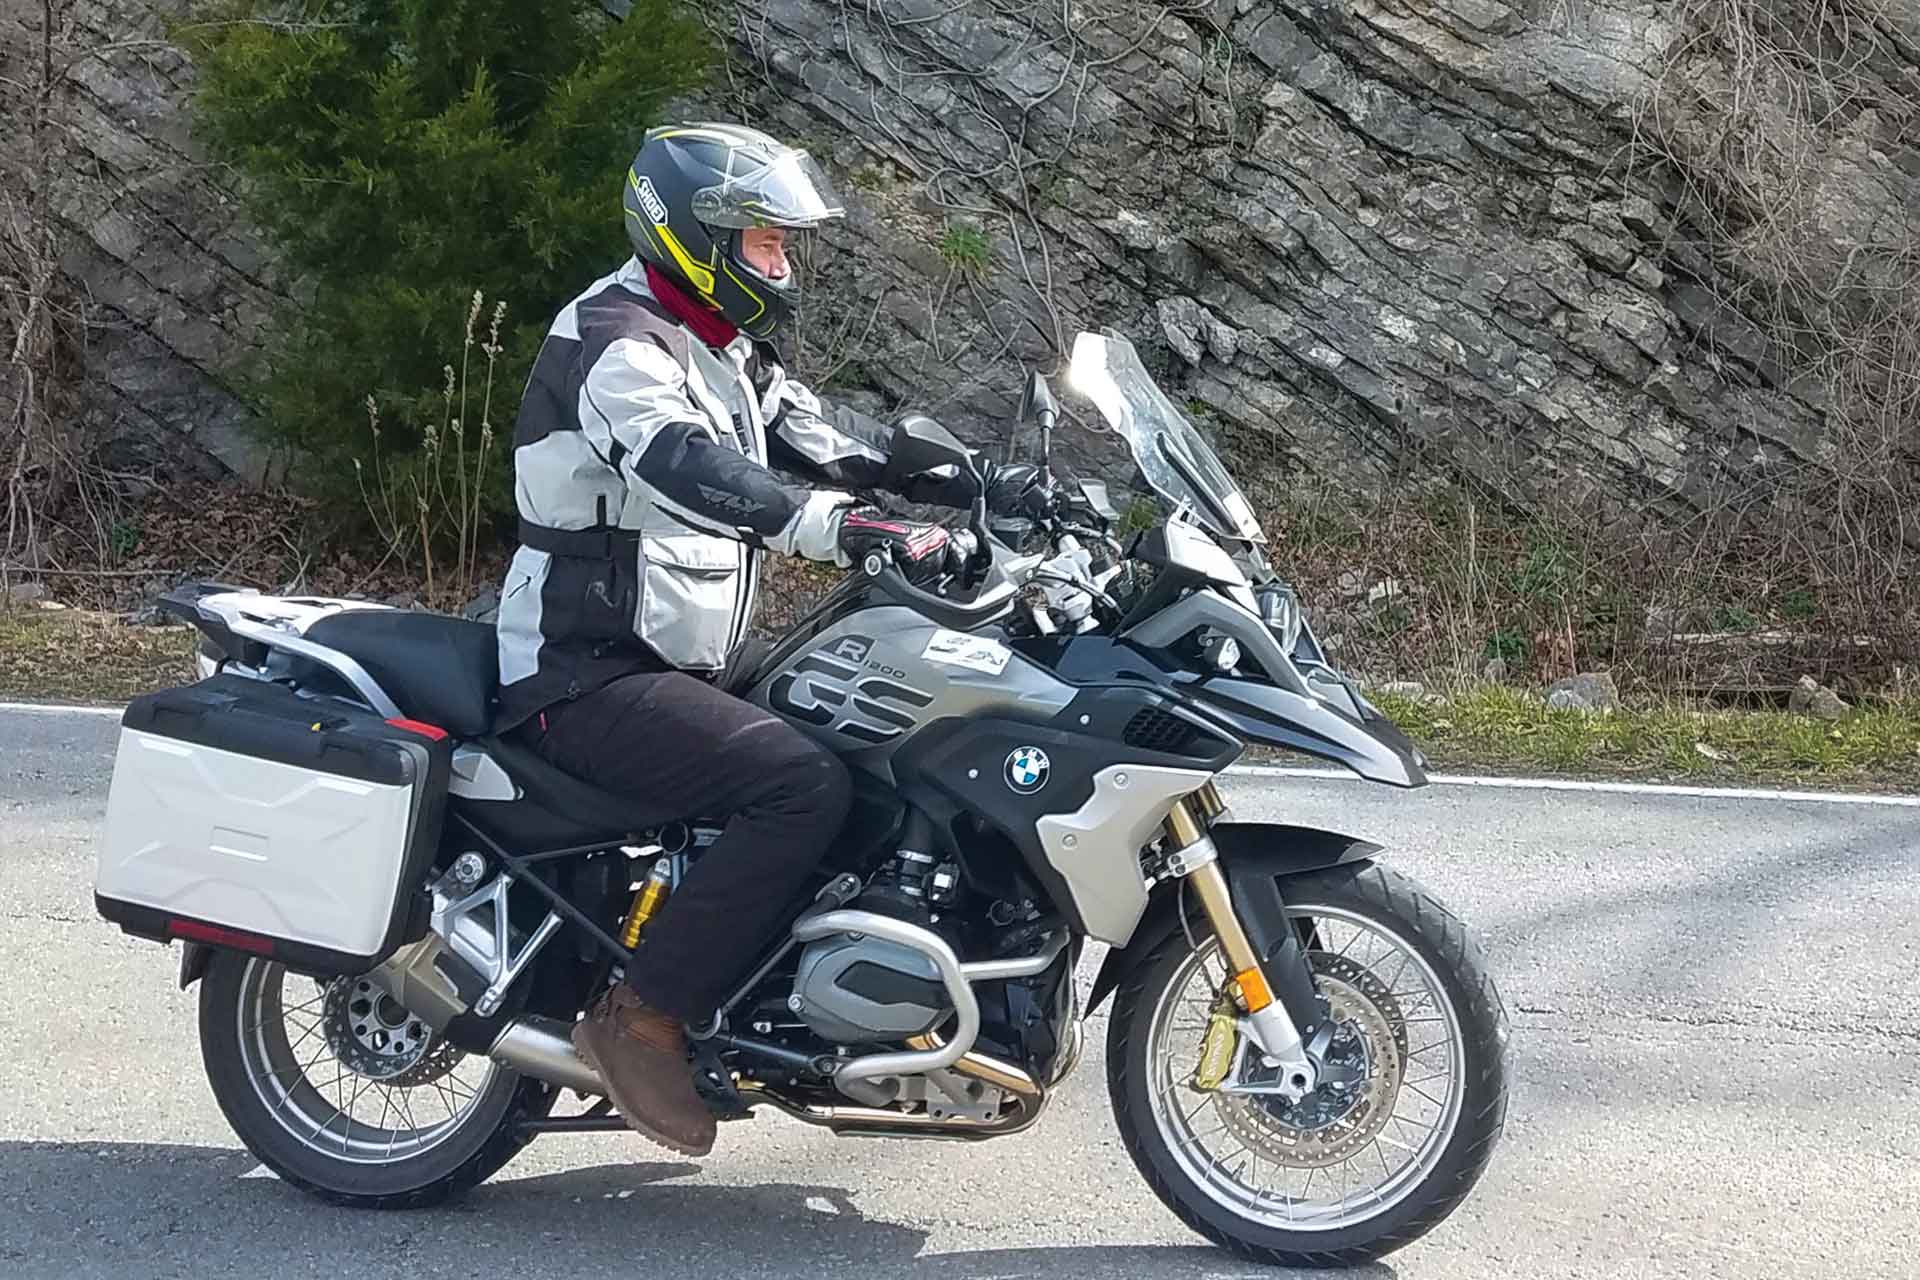 A rider maneuvers a silver BMW motorcycle